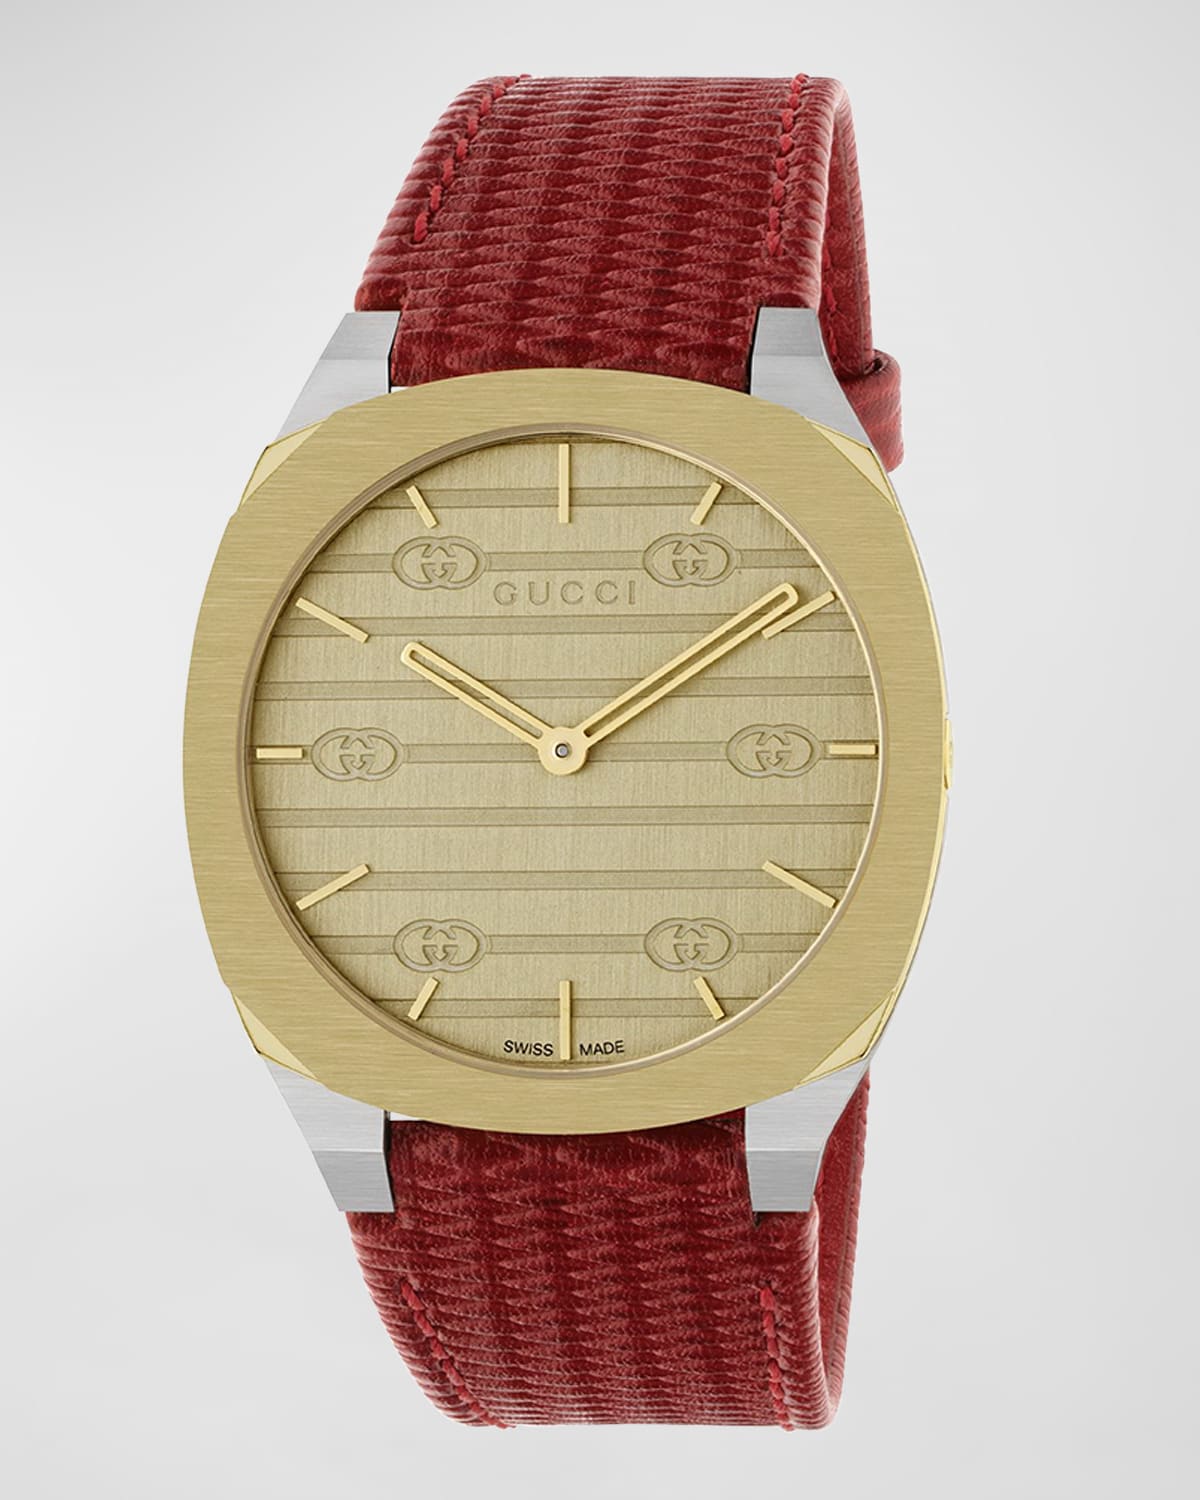 Shop Gucci 34mm 25h Quartz Watch With Leather Strap, Red